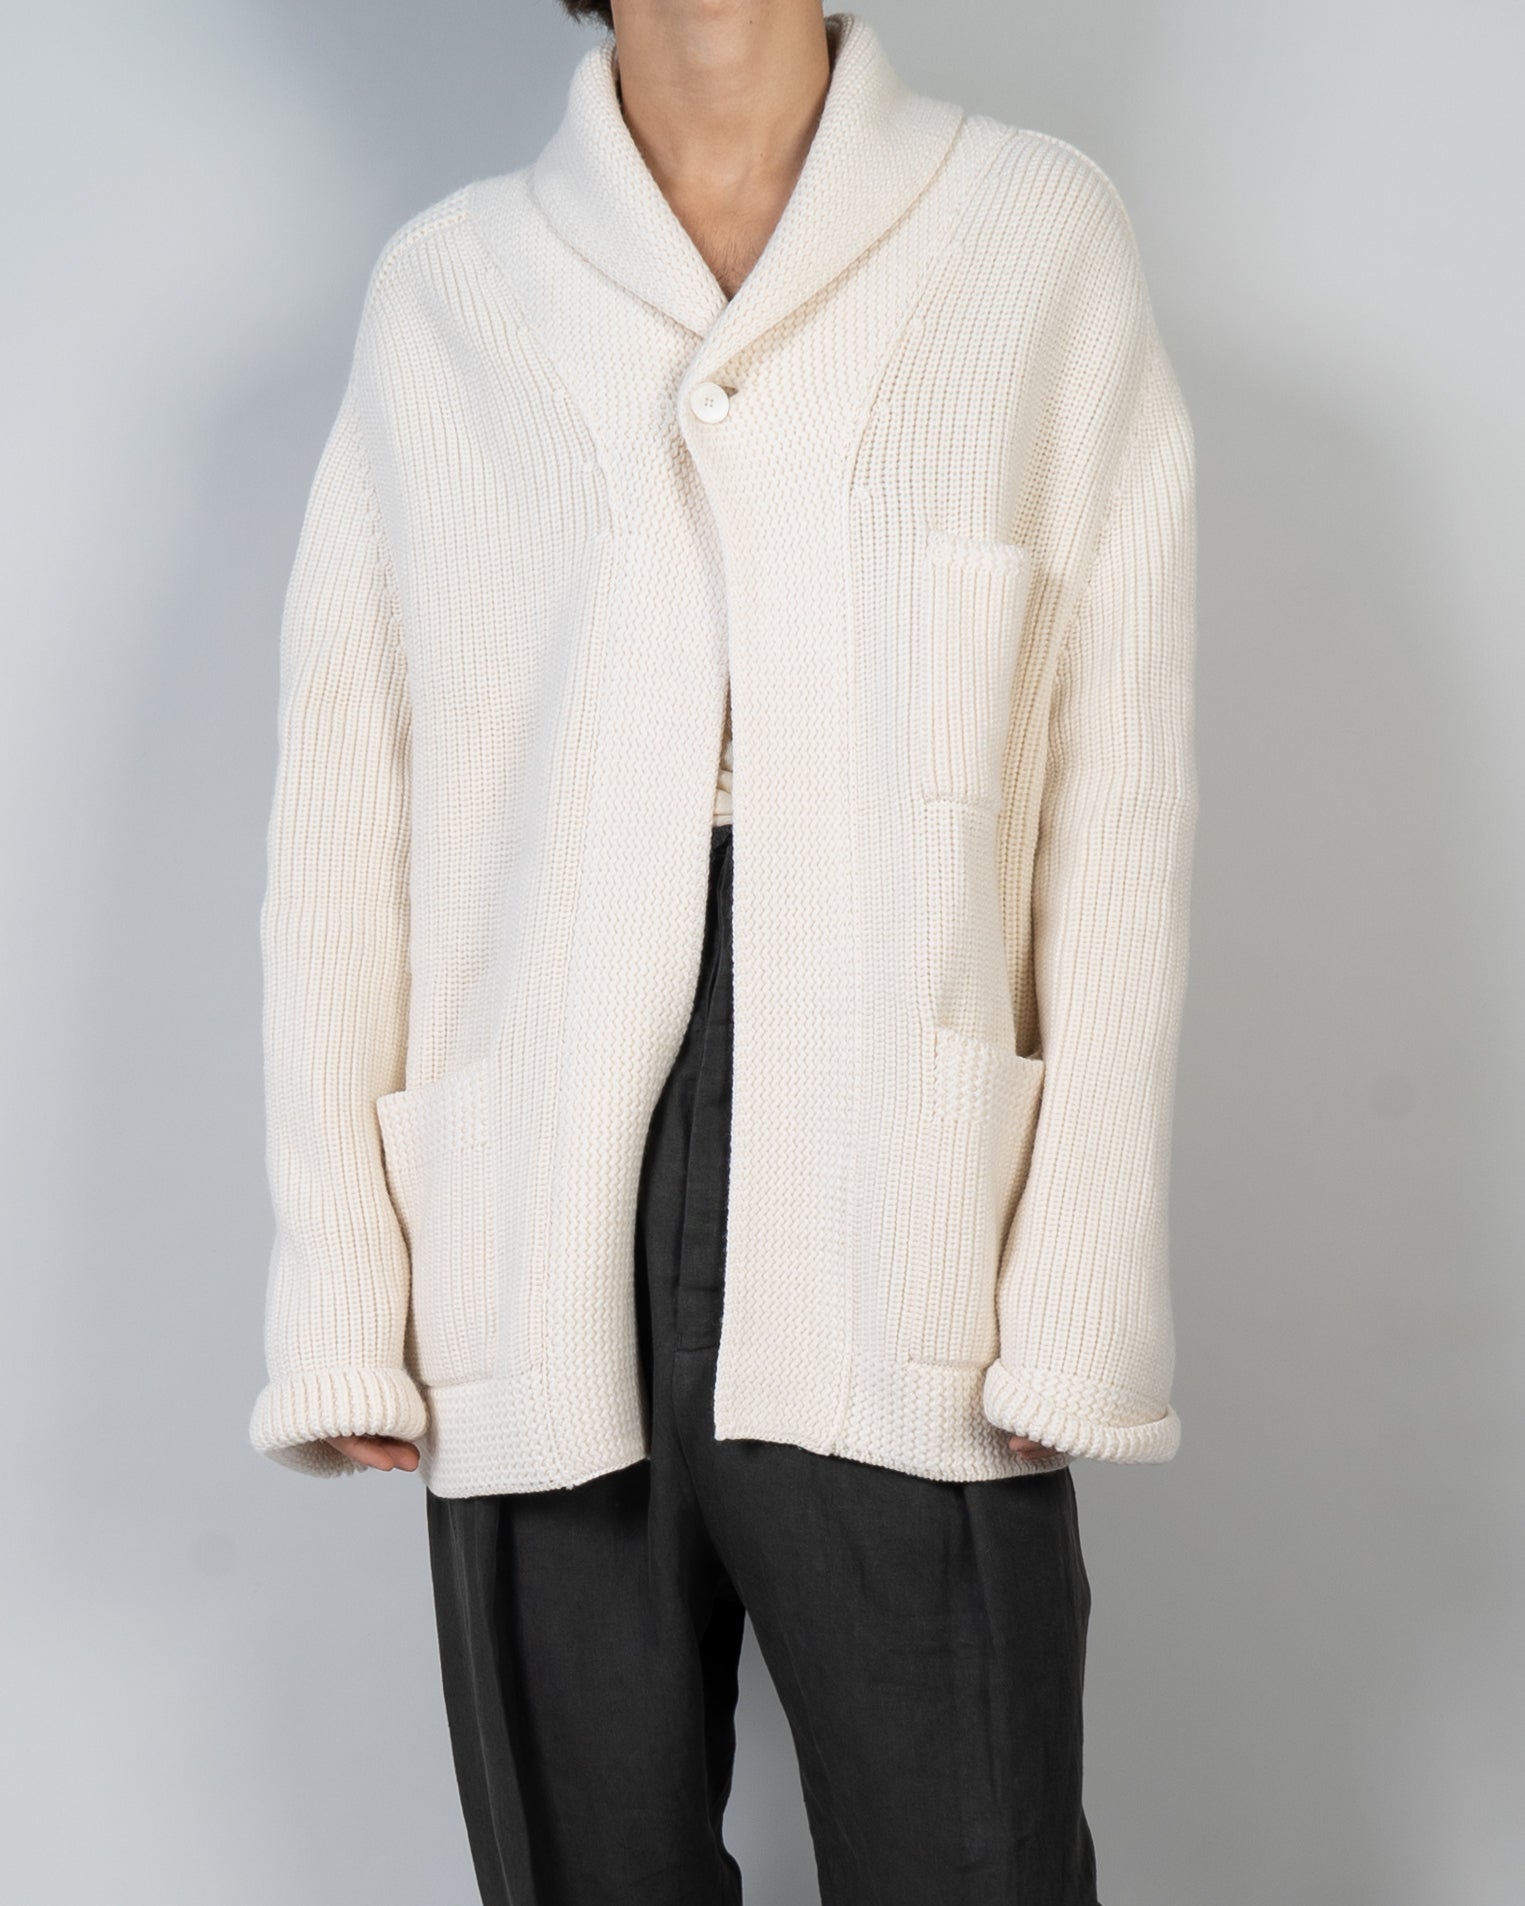 FW20 Knitted Ivory Cardigan Sample